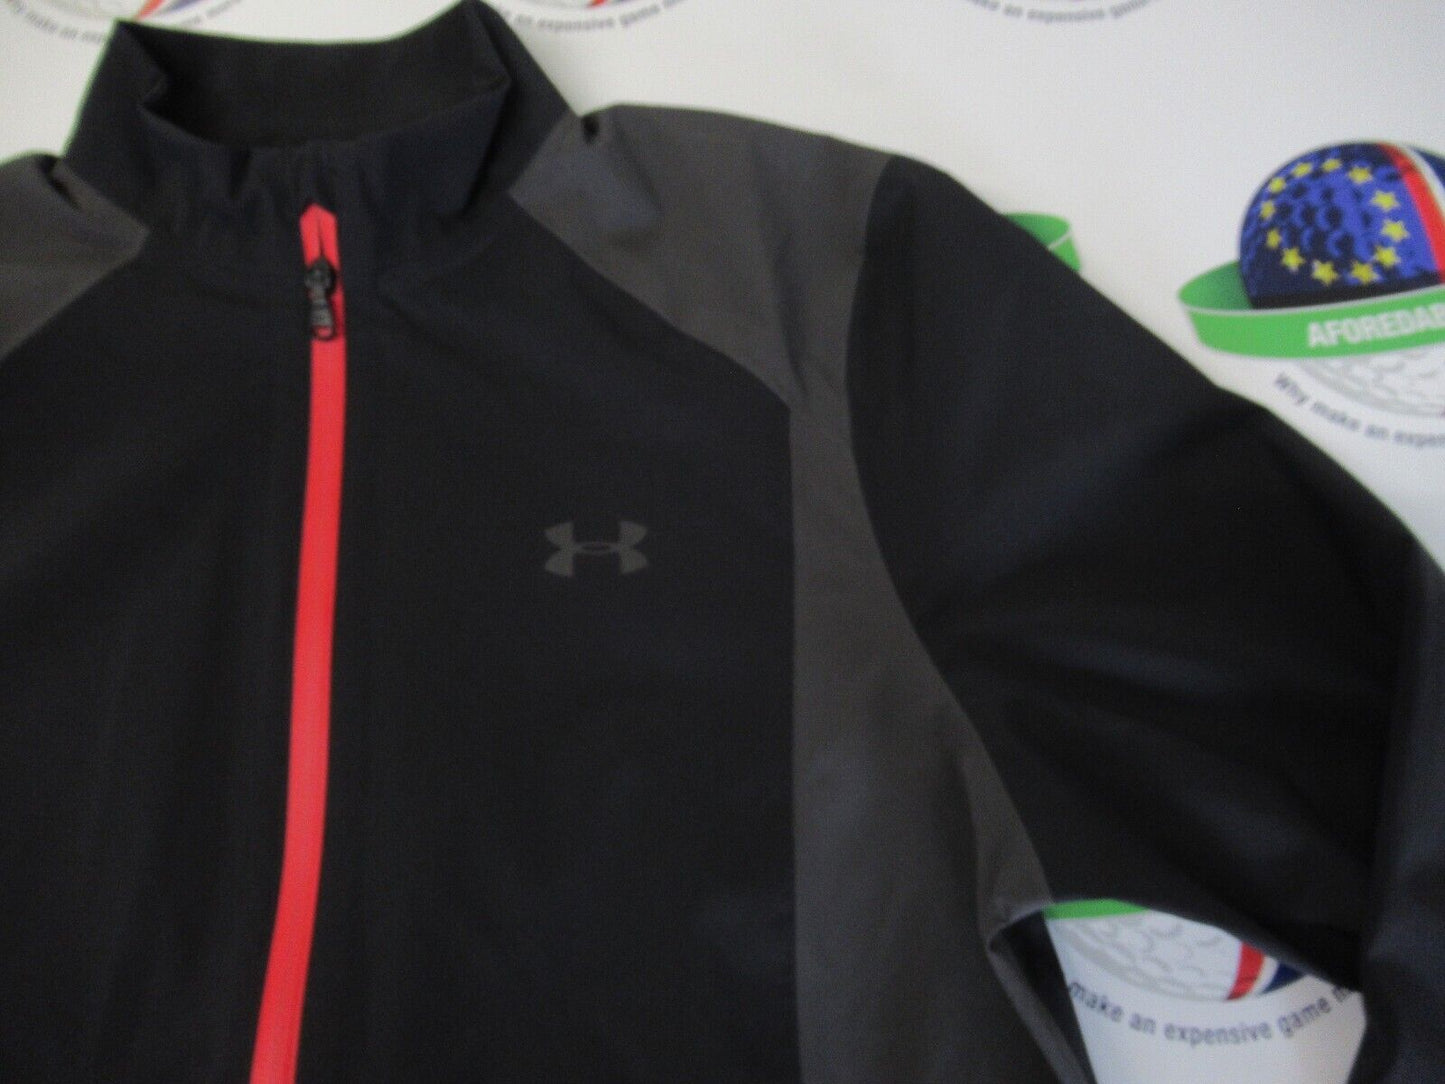 under armour portrush waterproof jacket grey/black/red uk size small loose